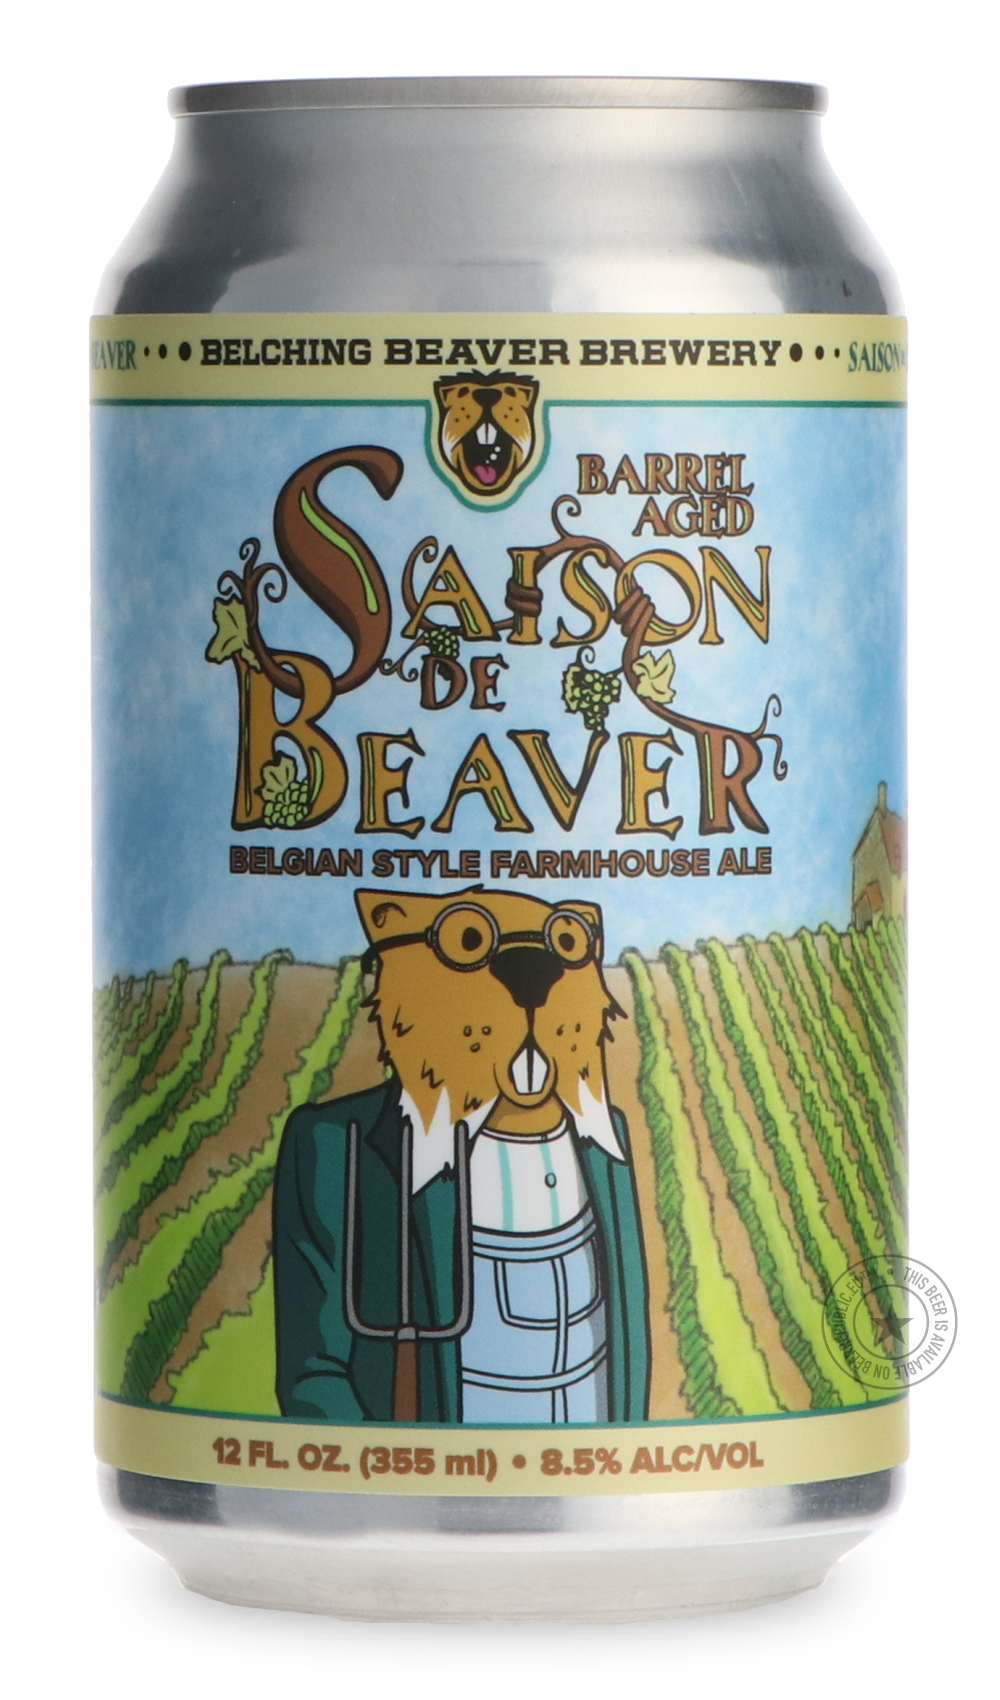 -Belching Beaver- Saison de Beaver Barrel Aged-Pale- Only @ Beer Republic - The best online beer store for American & Canadian craft beer - Buy beer online from the USA and Canada - Bier online kopen - Amerikaans bier kopen - Craft beer store - Craft beer kopen - Amerikanisch bier kaufen - Bier online kaufen - Acheter biere online - IPA - Stout - Porter - New England IPA - Hazy IPA - Imperial Stout - Barrel Aged - Barrel Aged Imperial Stout - Brown - Dark beer - Blond - Blonde - Pilsner - Lager - Wheat - We